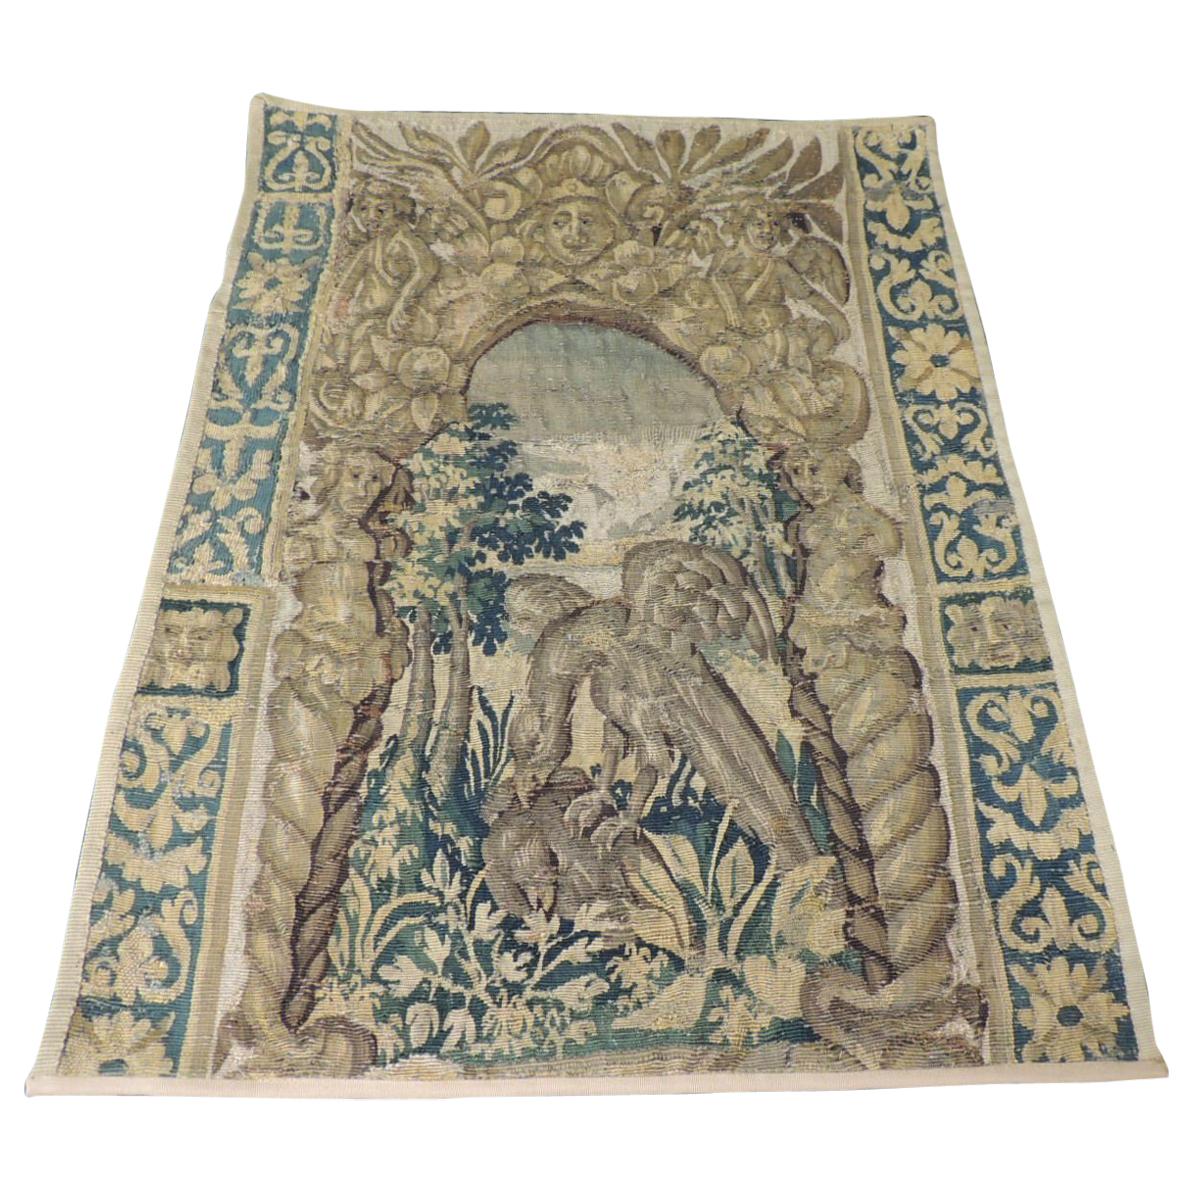 19th century green and gold verdure tapestry fragment